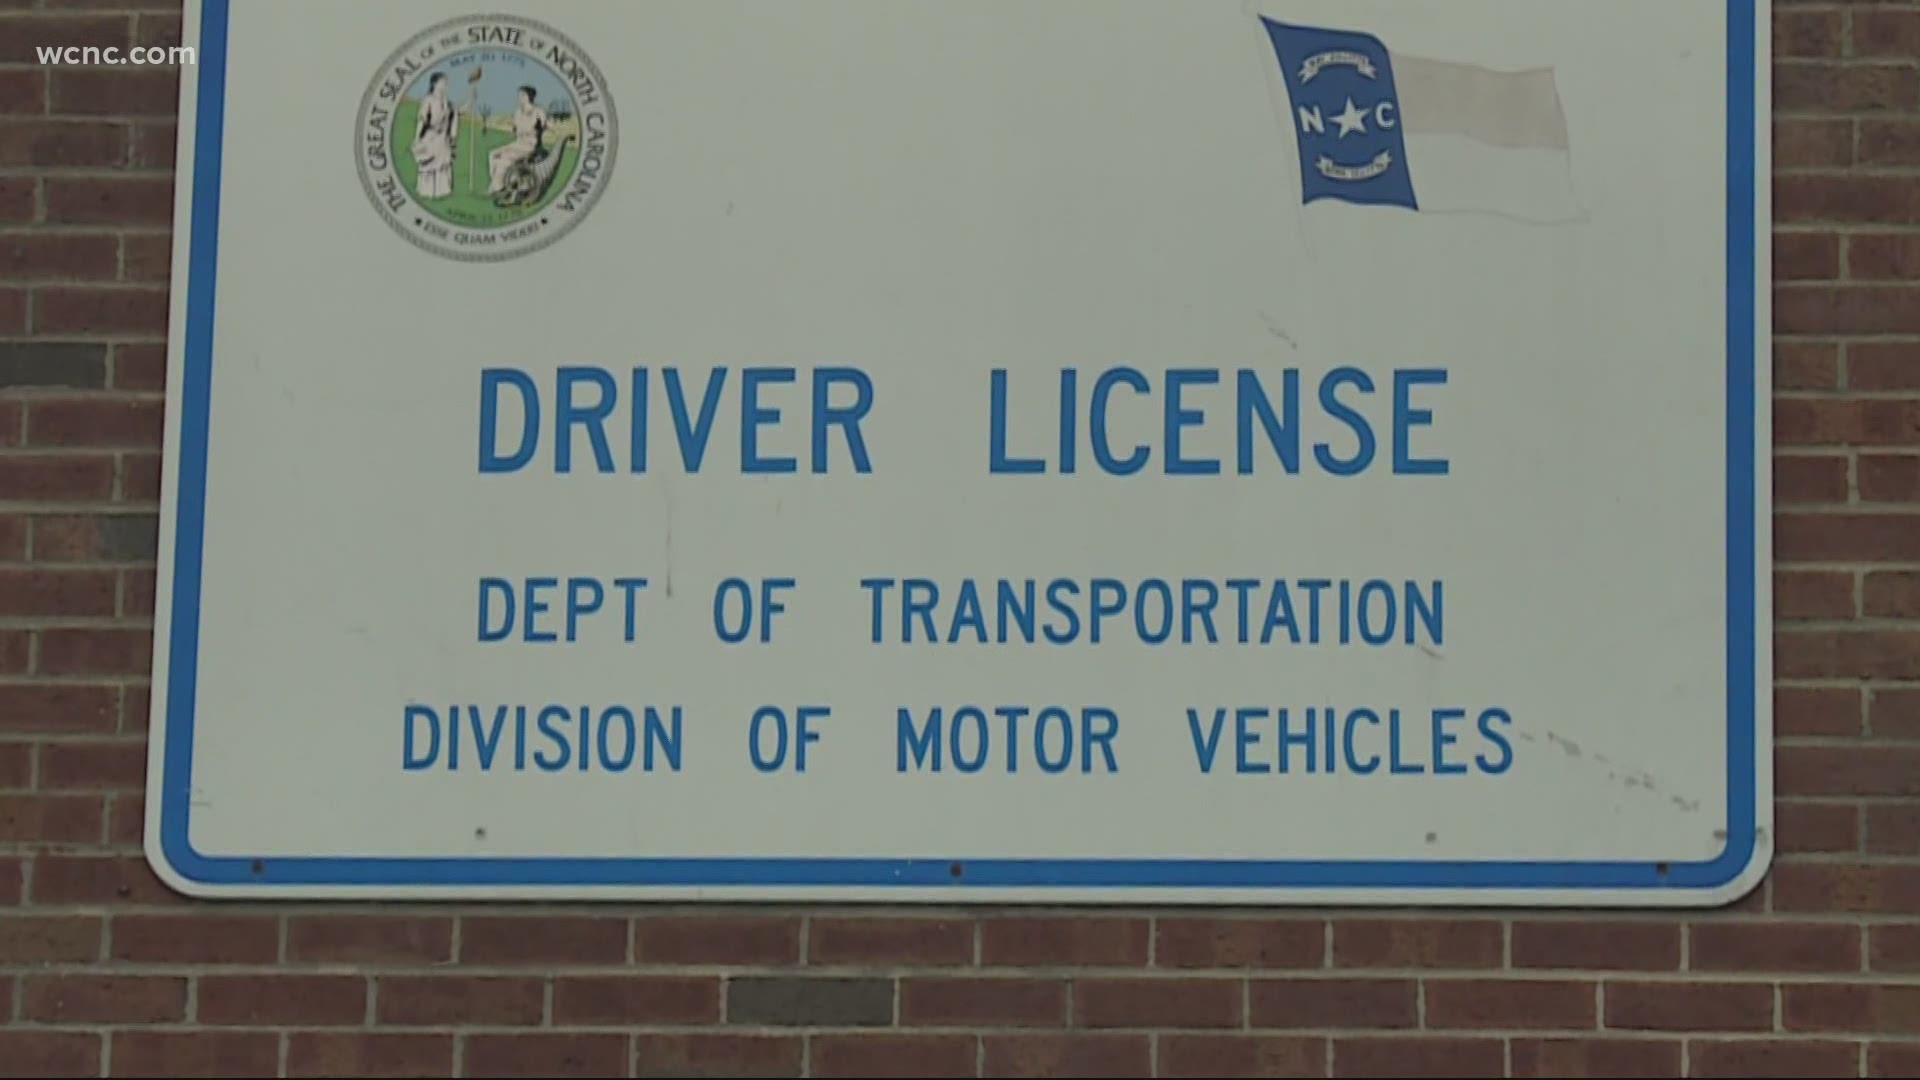 Now one woman is urging others to check when their license expires so they don't end up in her shoes.